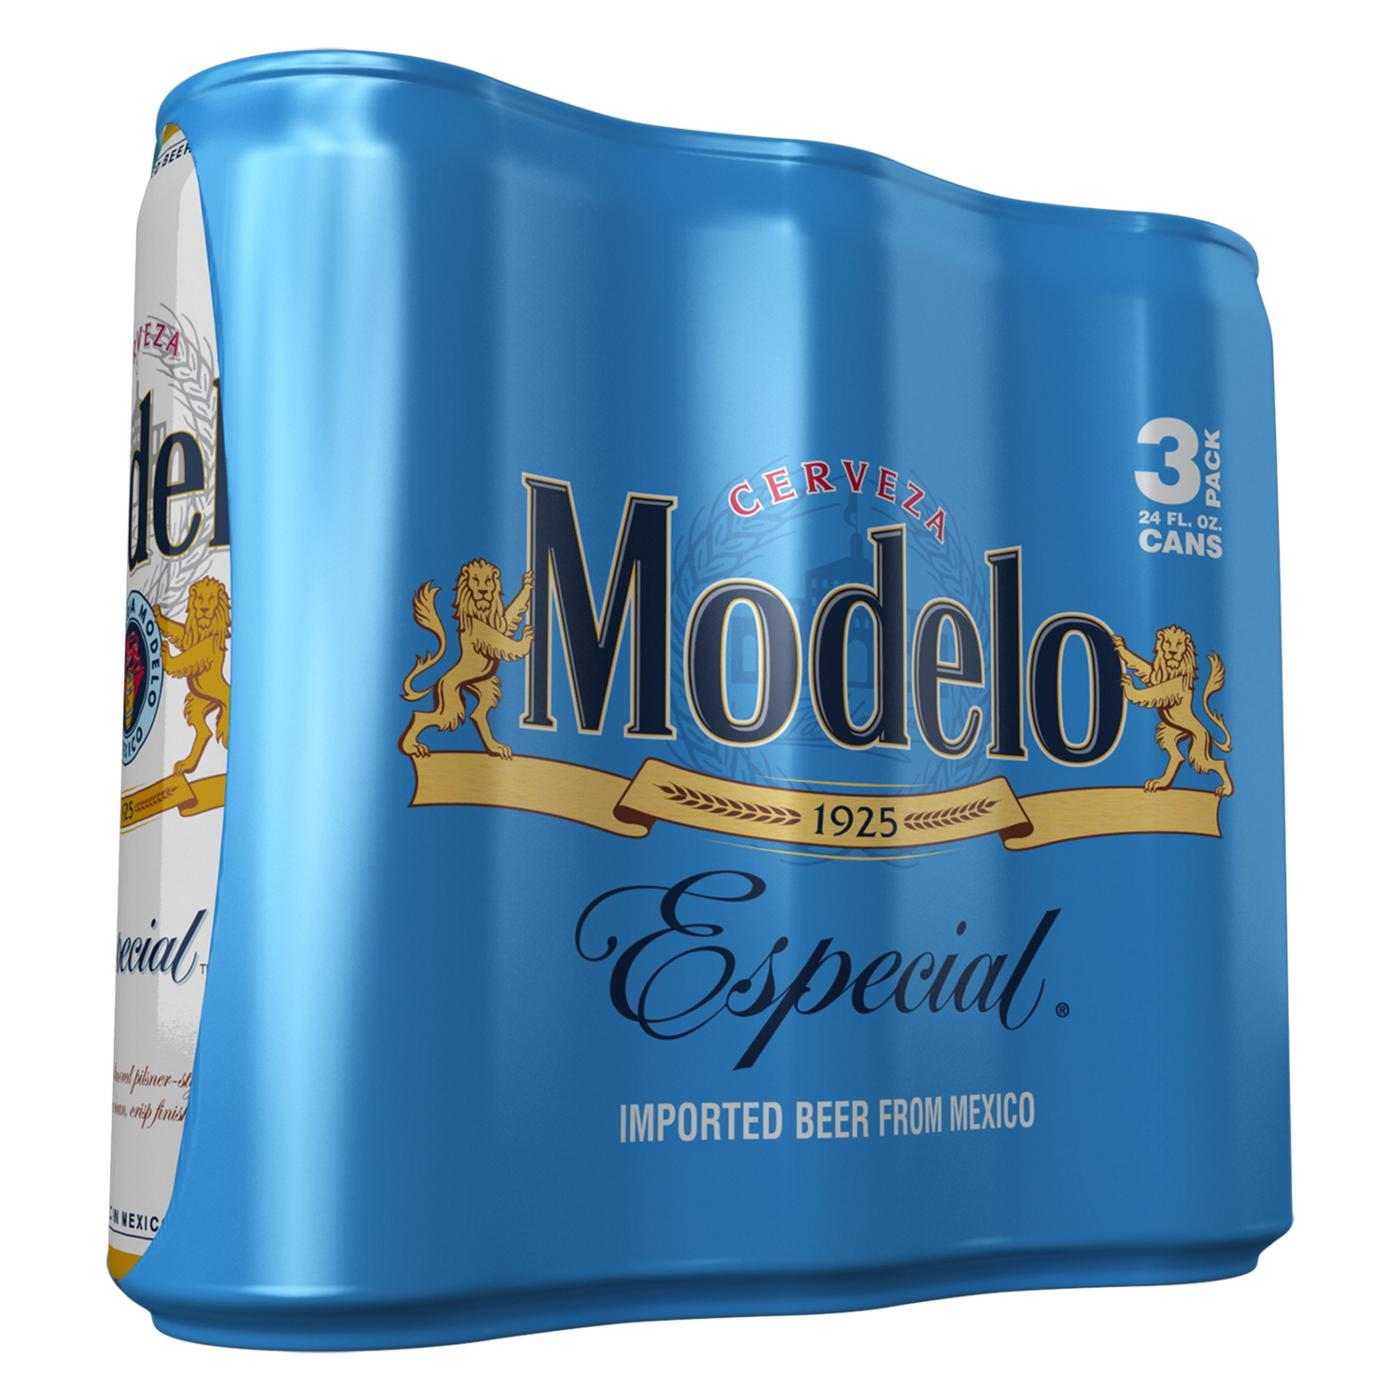 Modelo Especial Mexican Lager Import Beer 24 oz Cans, 3 pk; image 1 of 10